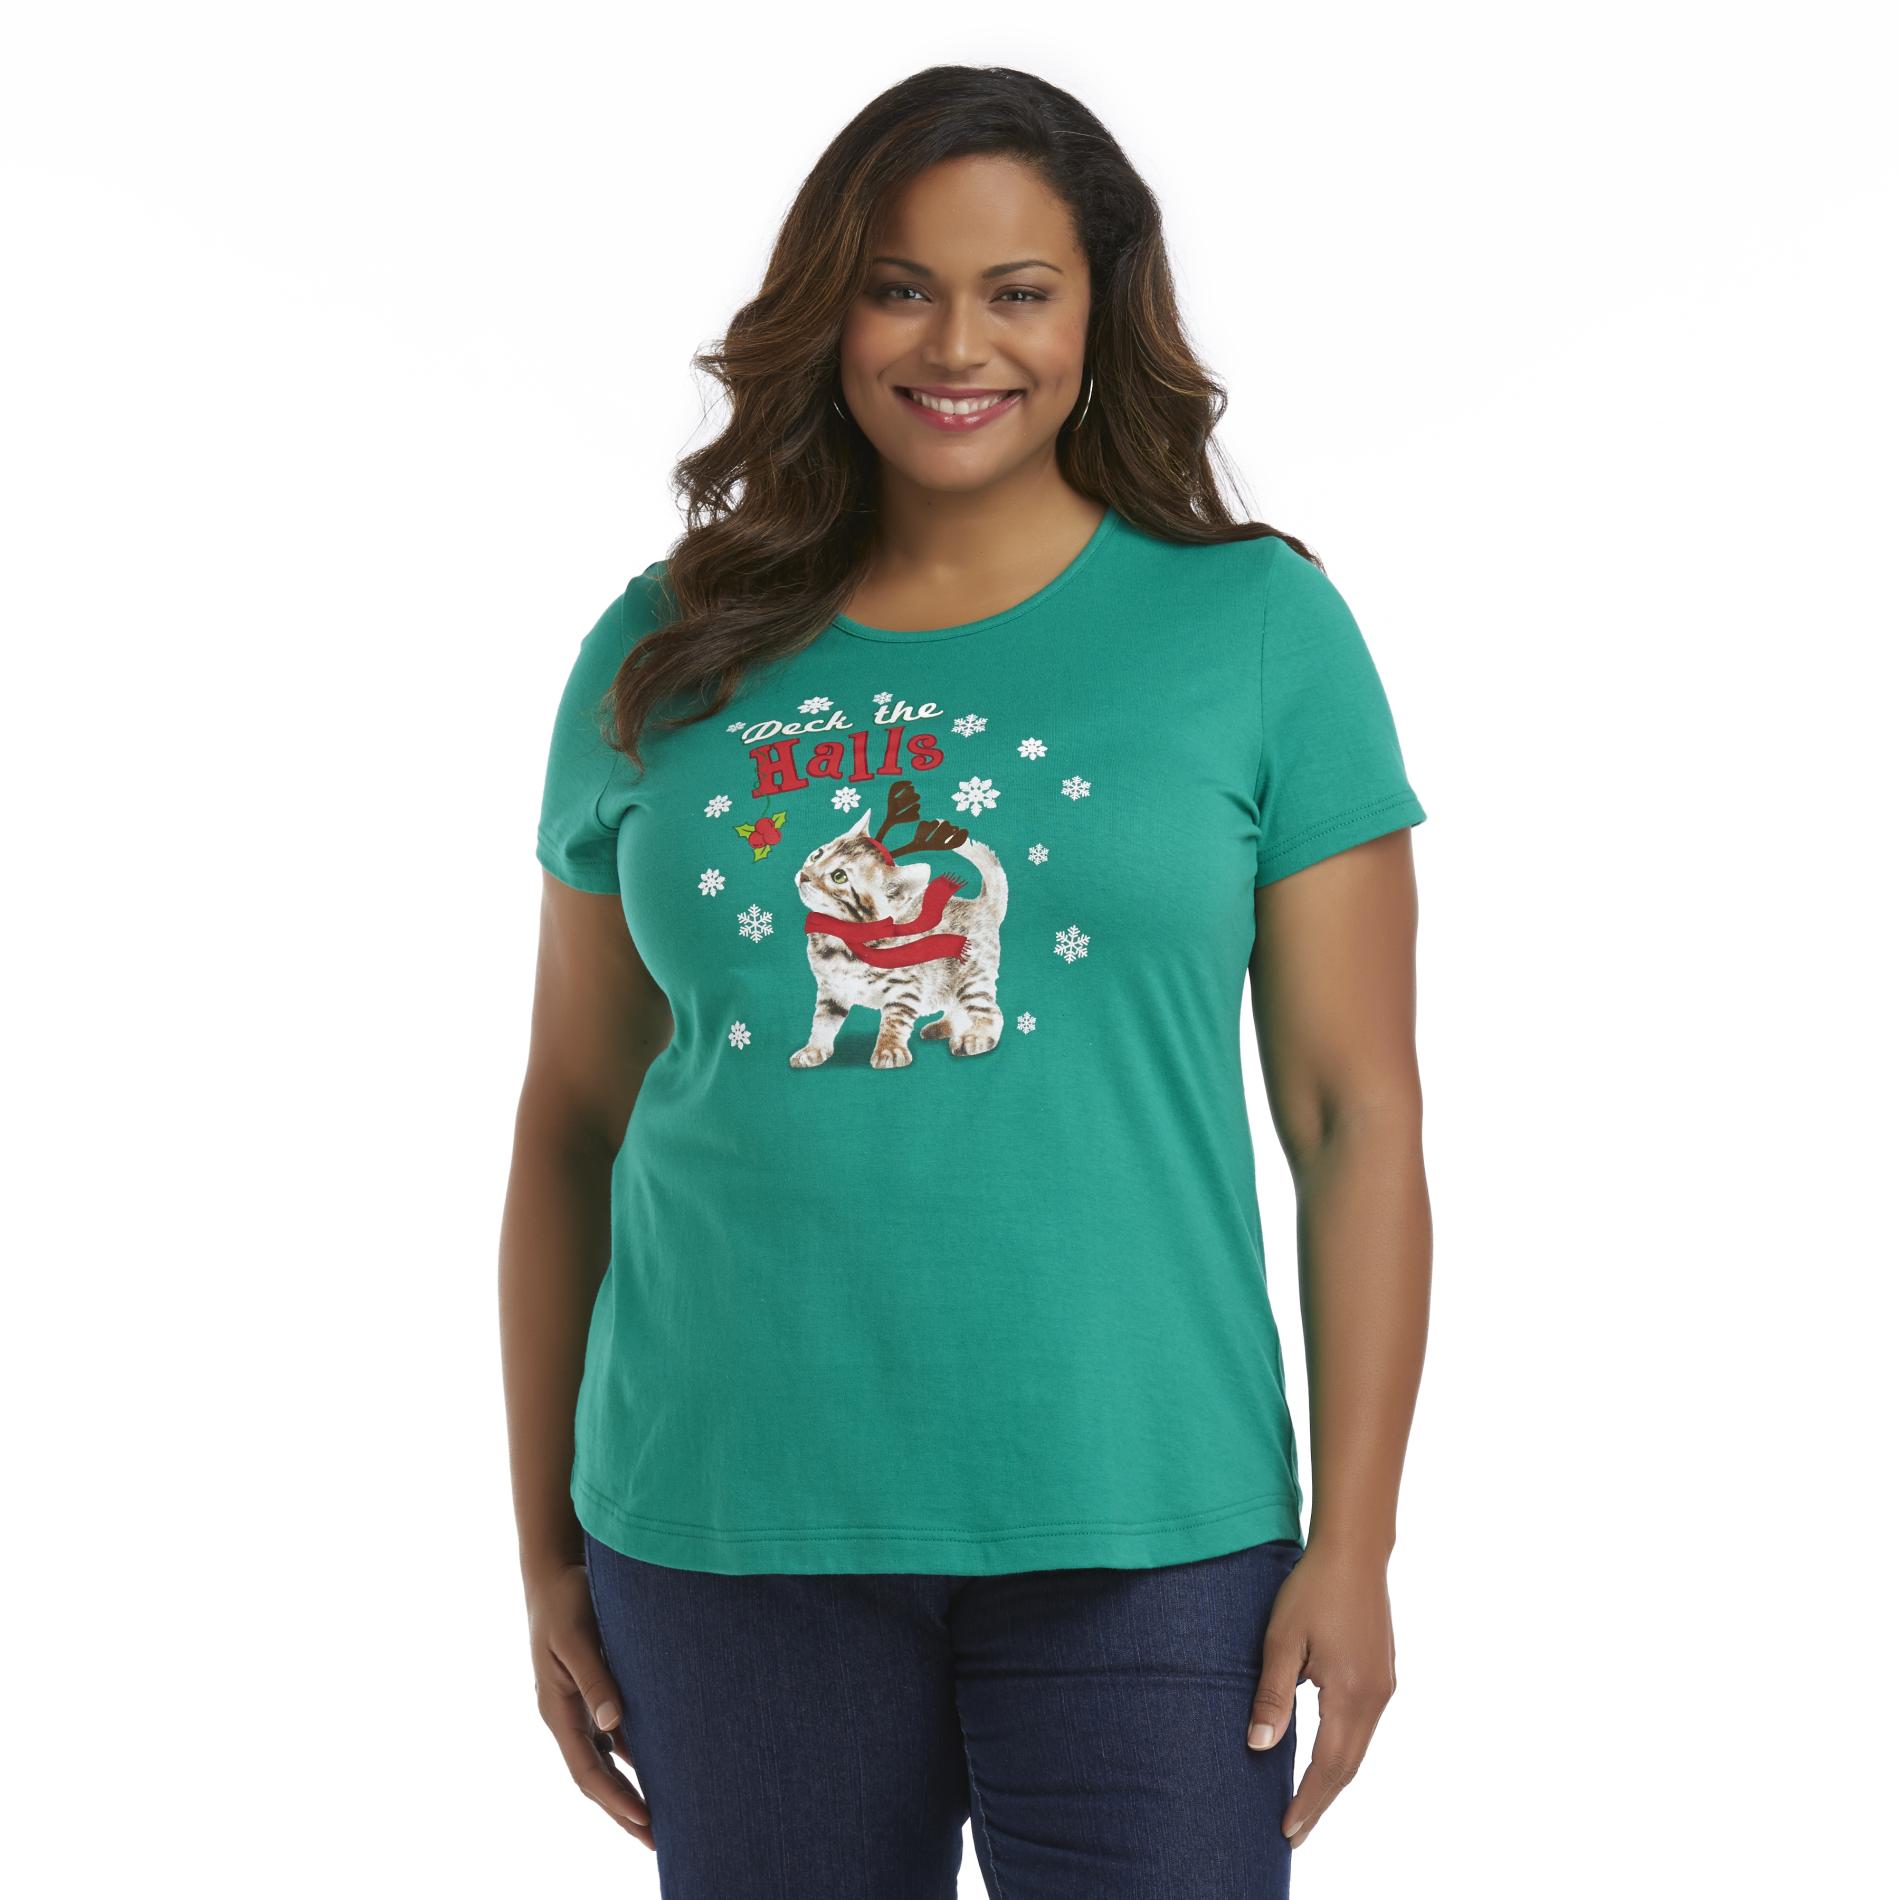 Holiday Editions Women's Plus Short-Sleeve Christmas T-Shirt - Cat